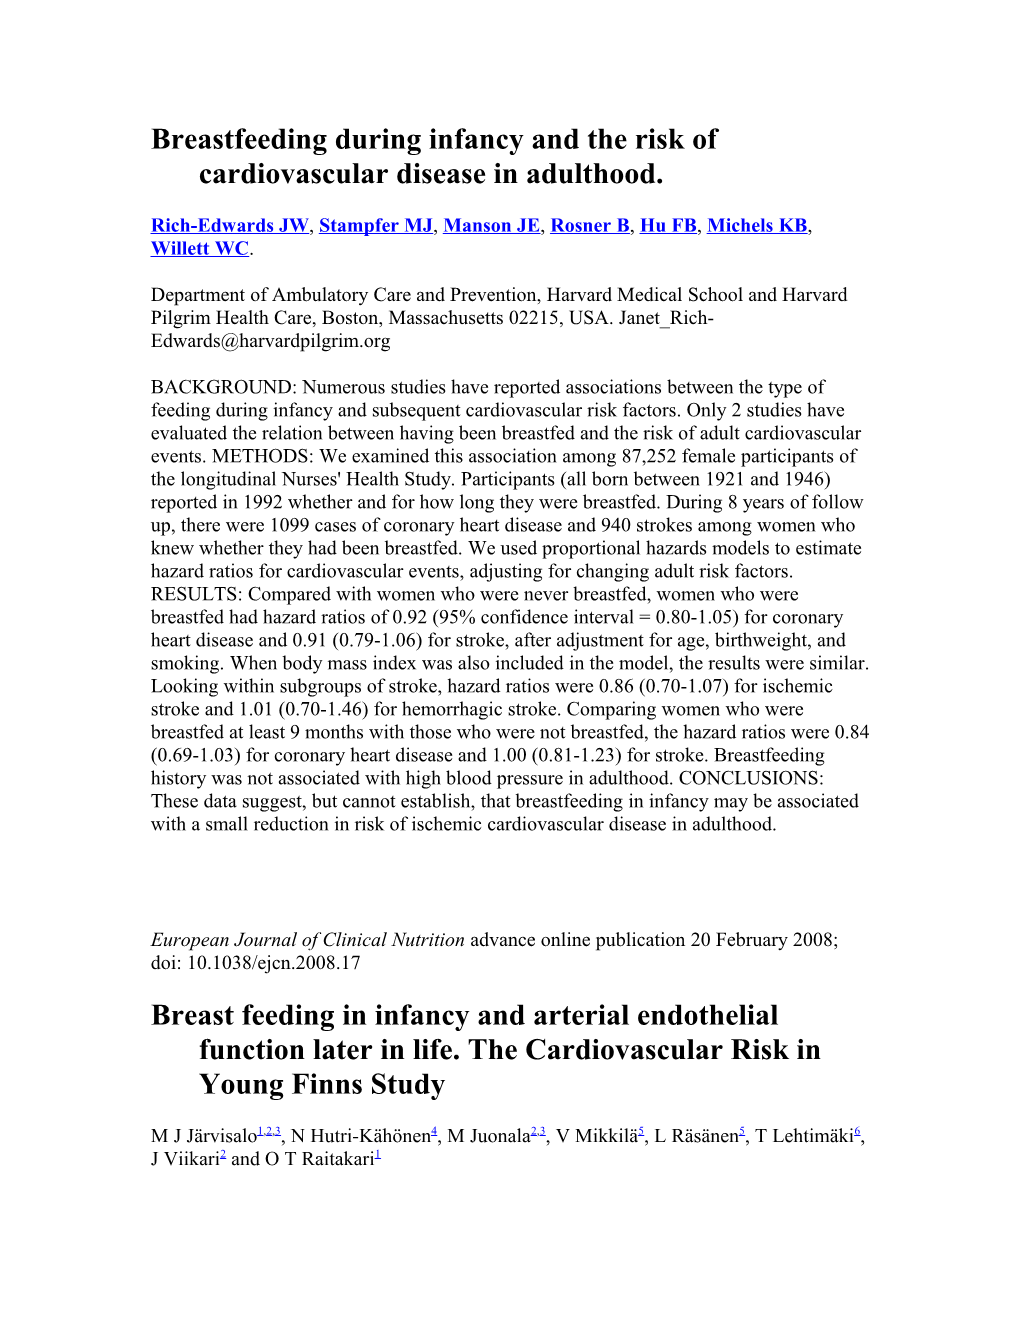 Breastfeeding During Infancy and the Risk of Cardiovascular Disease in Adulthood